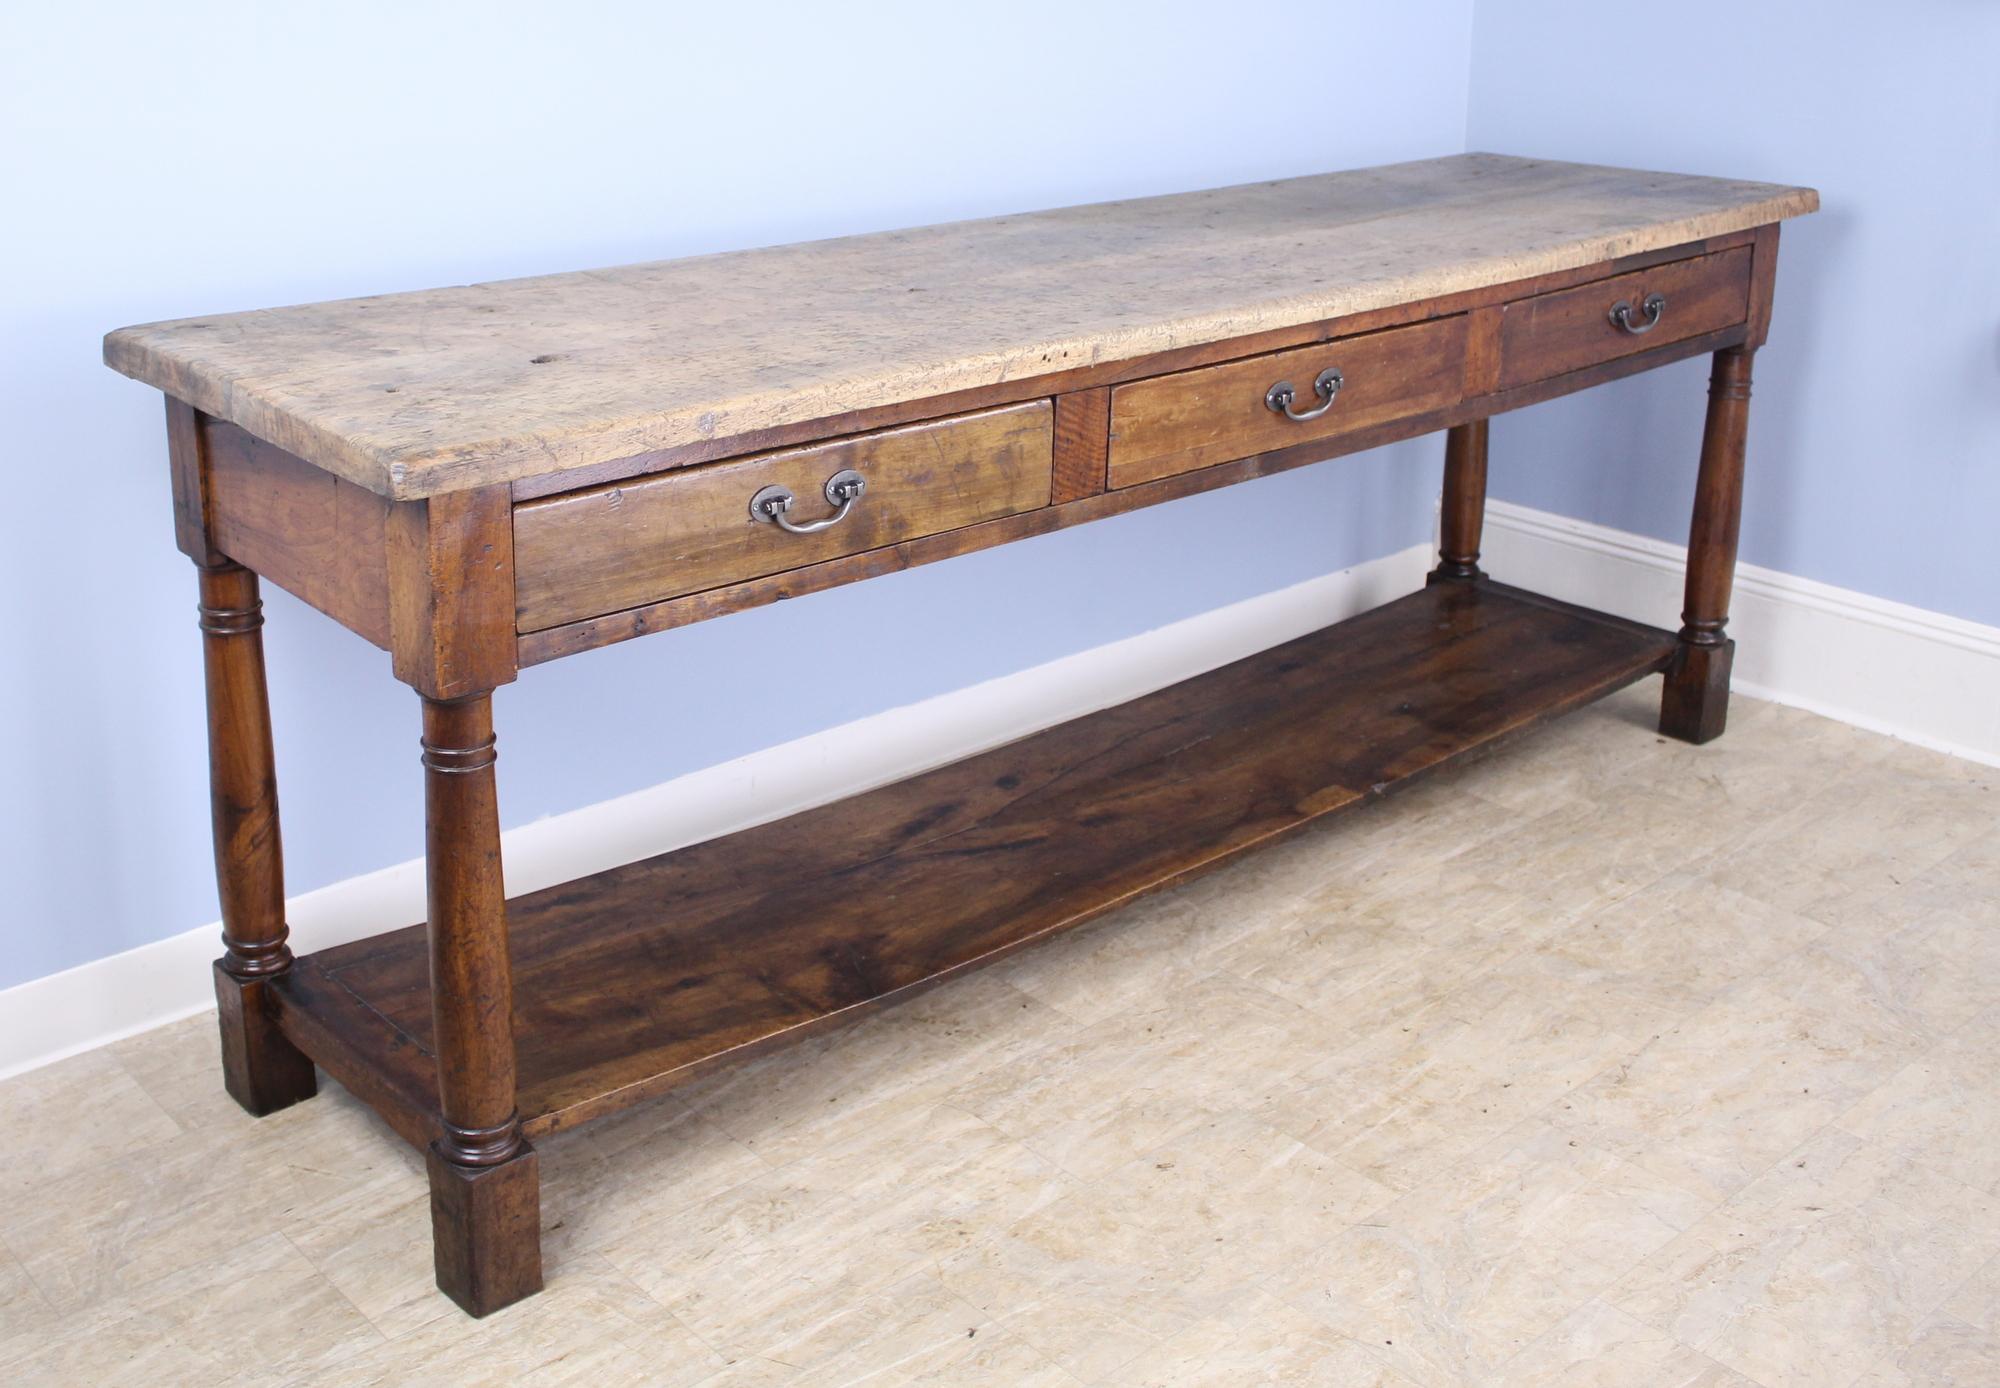 A very long, fabulous English draper's table, originally for use by a tailor or seamstress. The top is quite distressed and scrubbed; evidence of its long industrial use. The polished walnut base has lovely color, grain, and patina. Three roomy